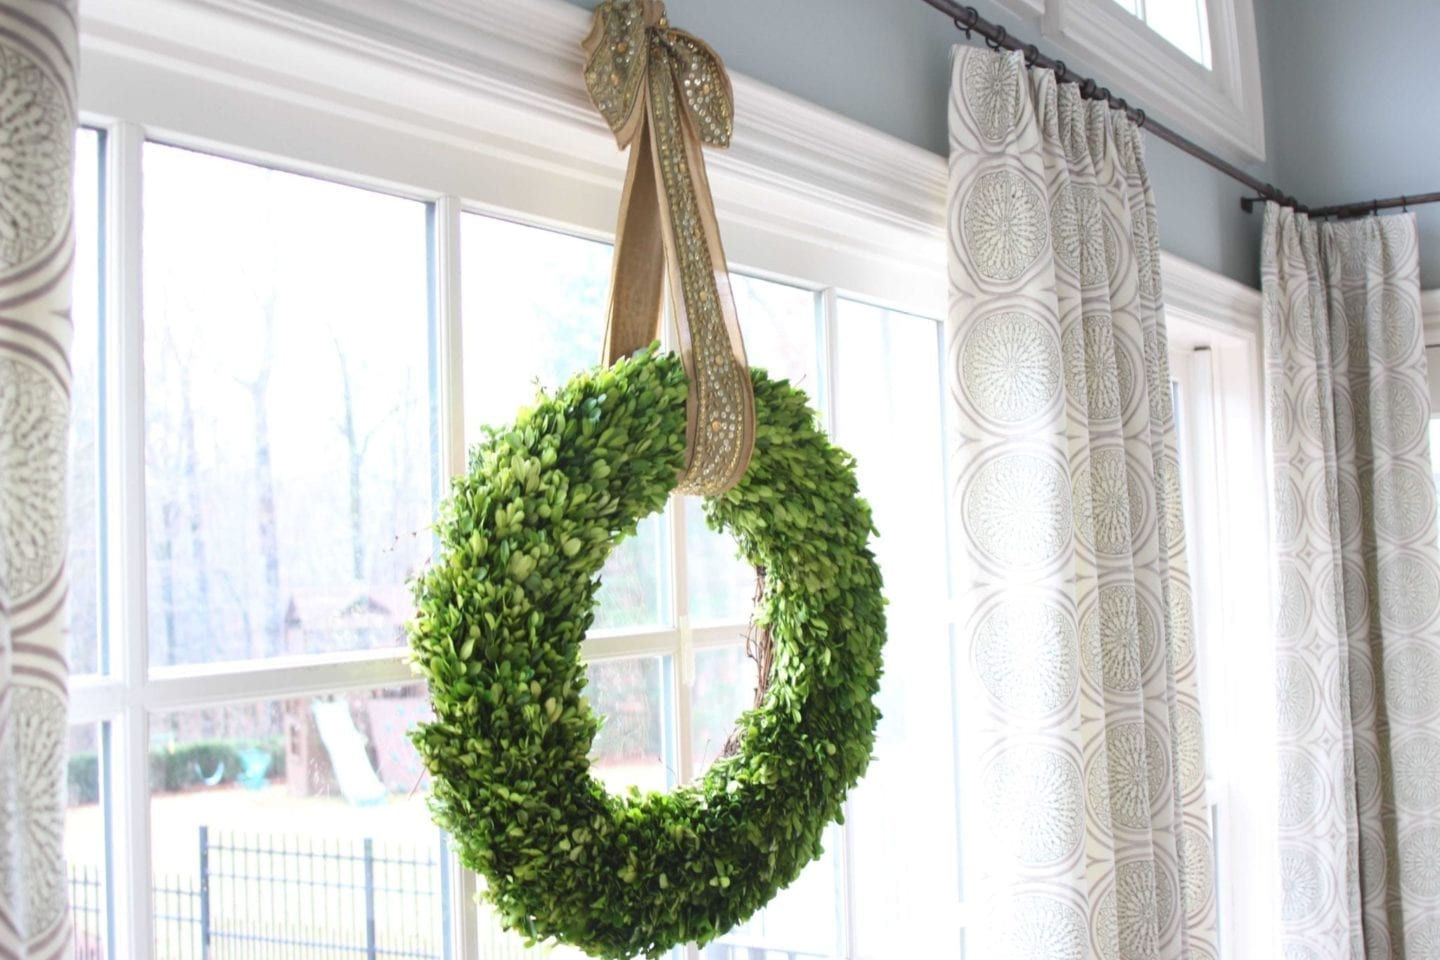 How to hang boxwood wreaths with ribbon